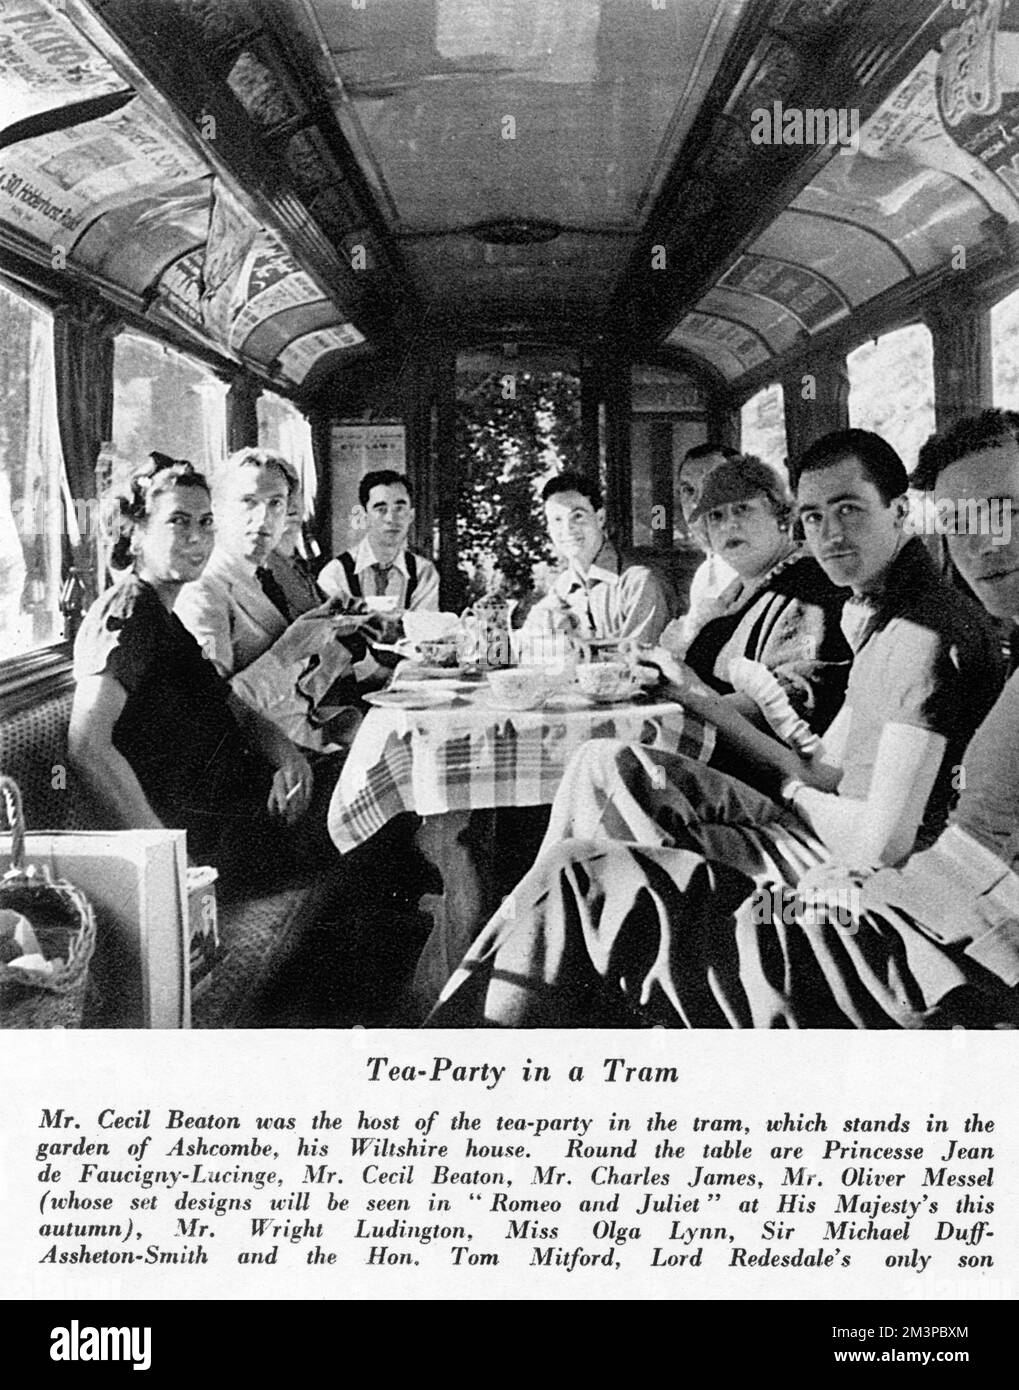 Cecil Beaton hosted a tea party in a tram which stood in his garden at Ashcombe, his Wiltshire home. Round the table are Princesse Jean de Faucigny-Lucinge, Mr Cecil Beaton, Mr Charles James, Mr Oliver Messel, Mr Wright Luddington, Miss Olga Lynn, Sir Michael Duff-Assheton-Smith and the Hon. Tom Mitford, Lord Redesdale's only son.     Date: 1936 Stock Photo